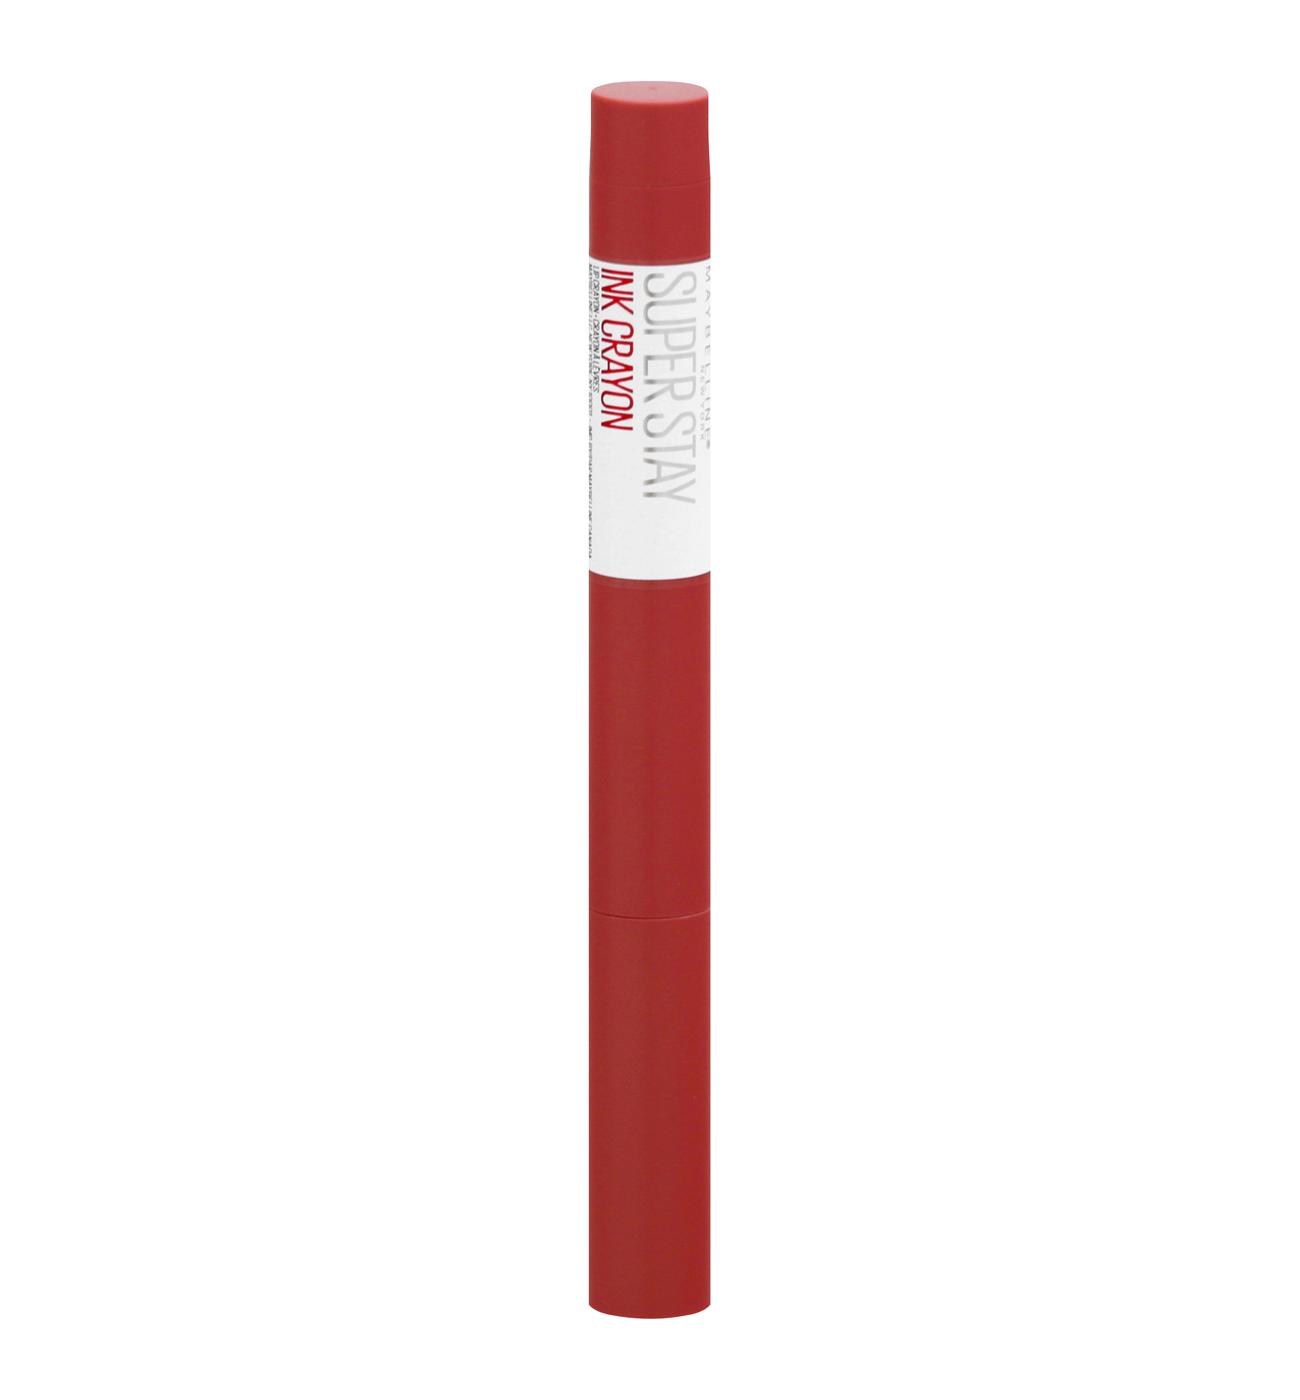 Maybelline SuperStay Ink Crayon Lipstick- Long Wear (Pick Your Shade)